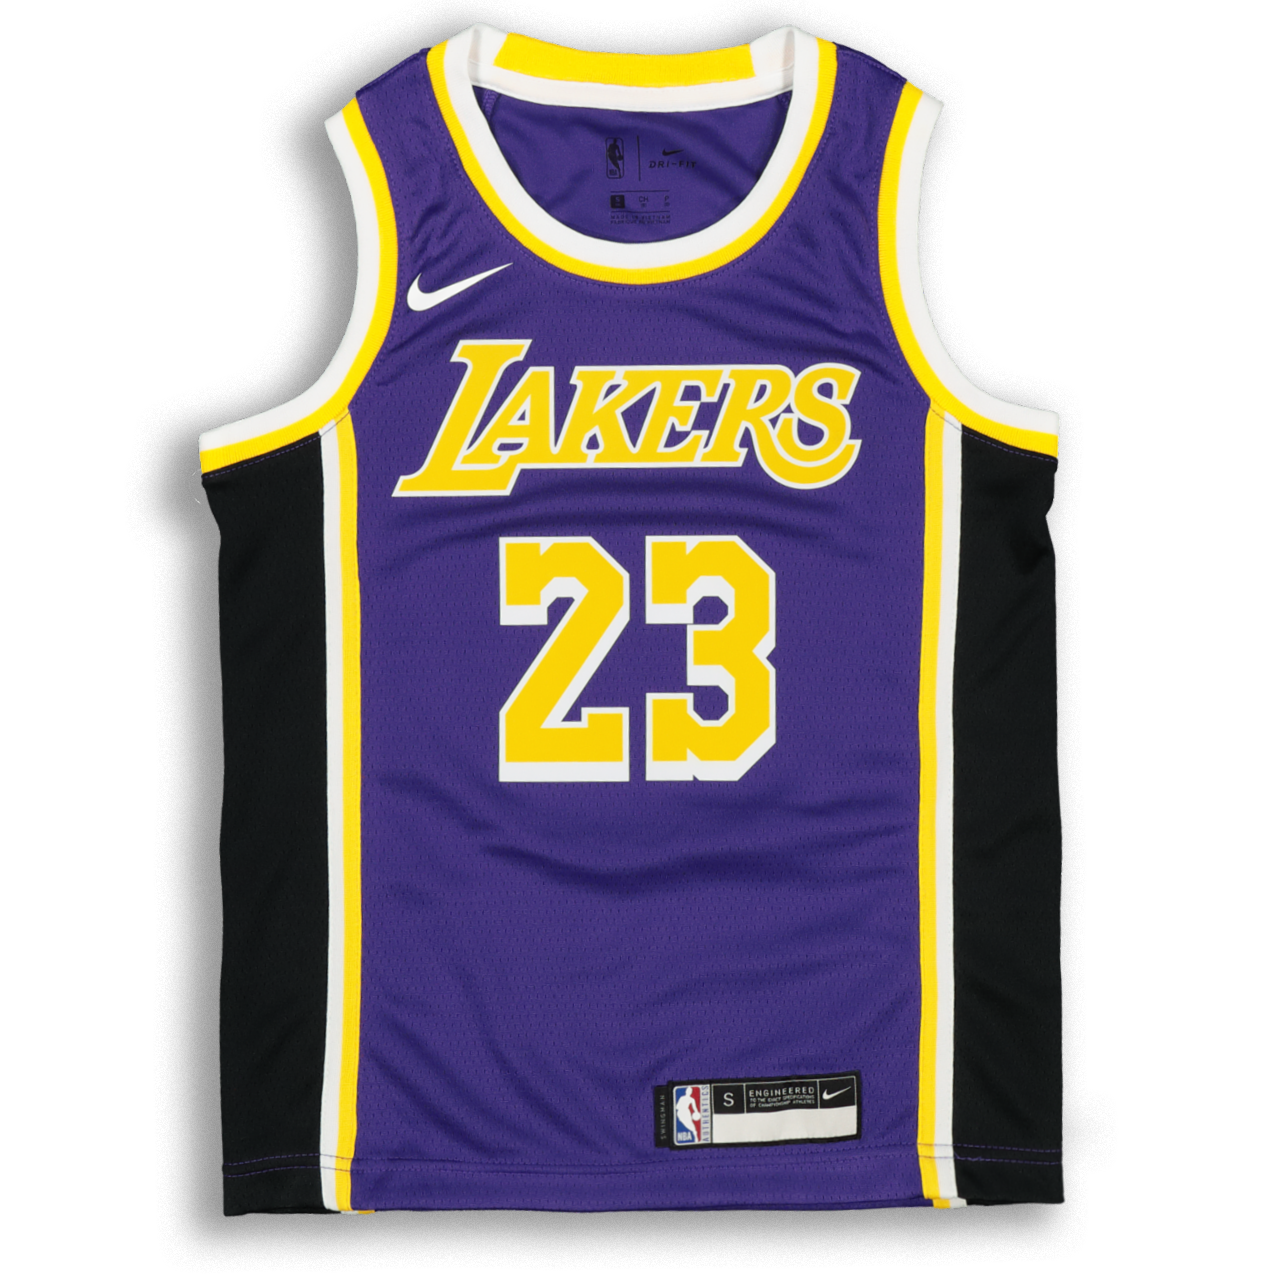 lakers jersey 23